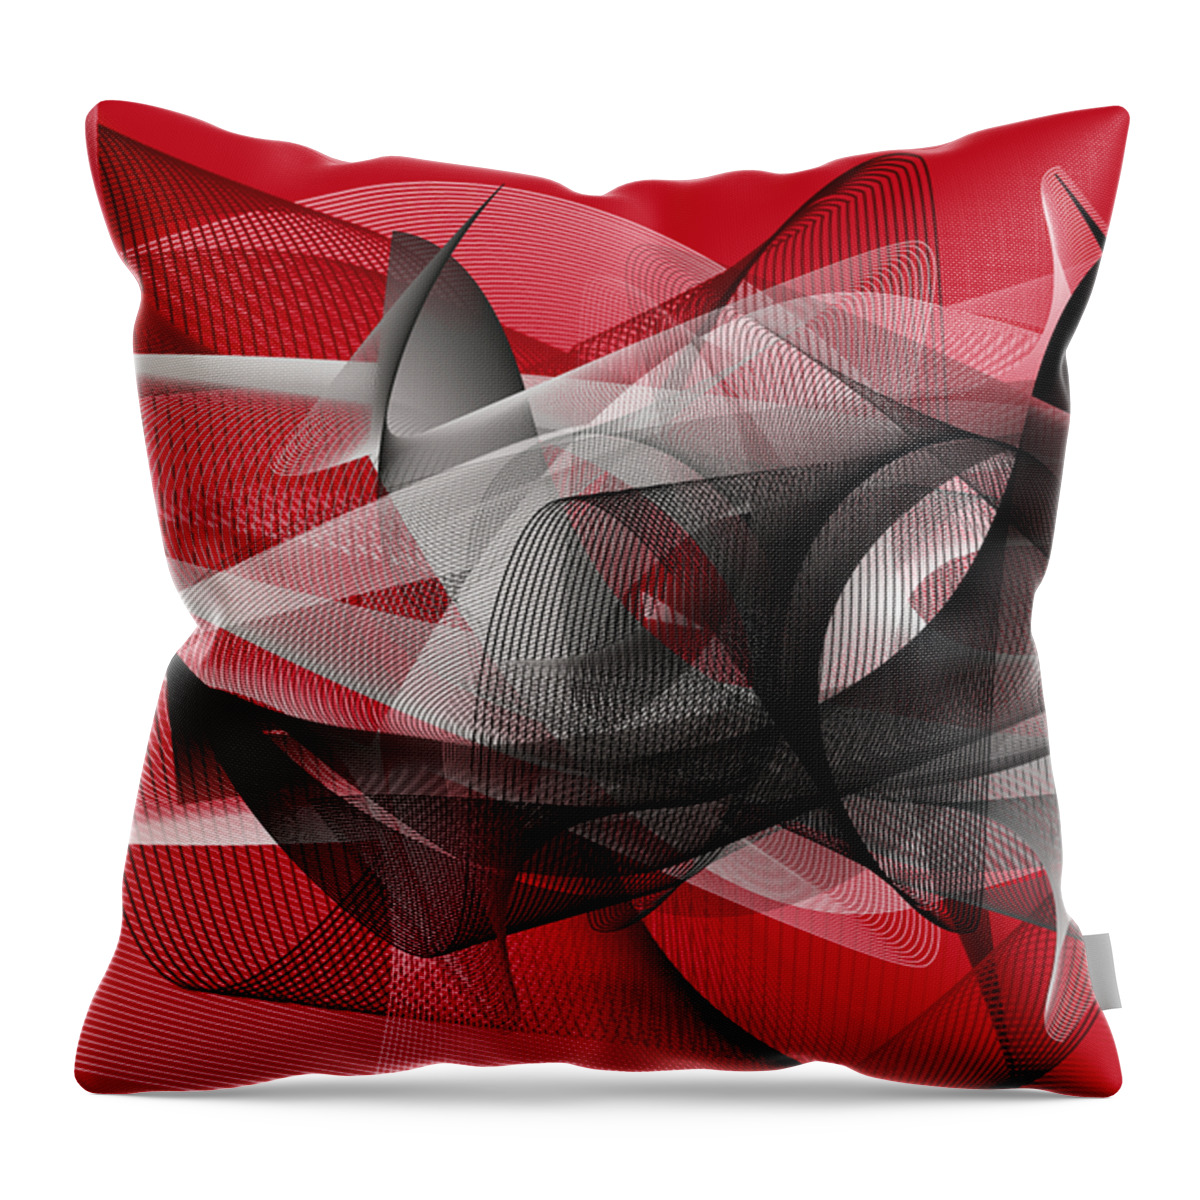 Kinetics Throw Pillow featuring the mixed media Velocity 2 by Angelina Tamez